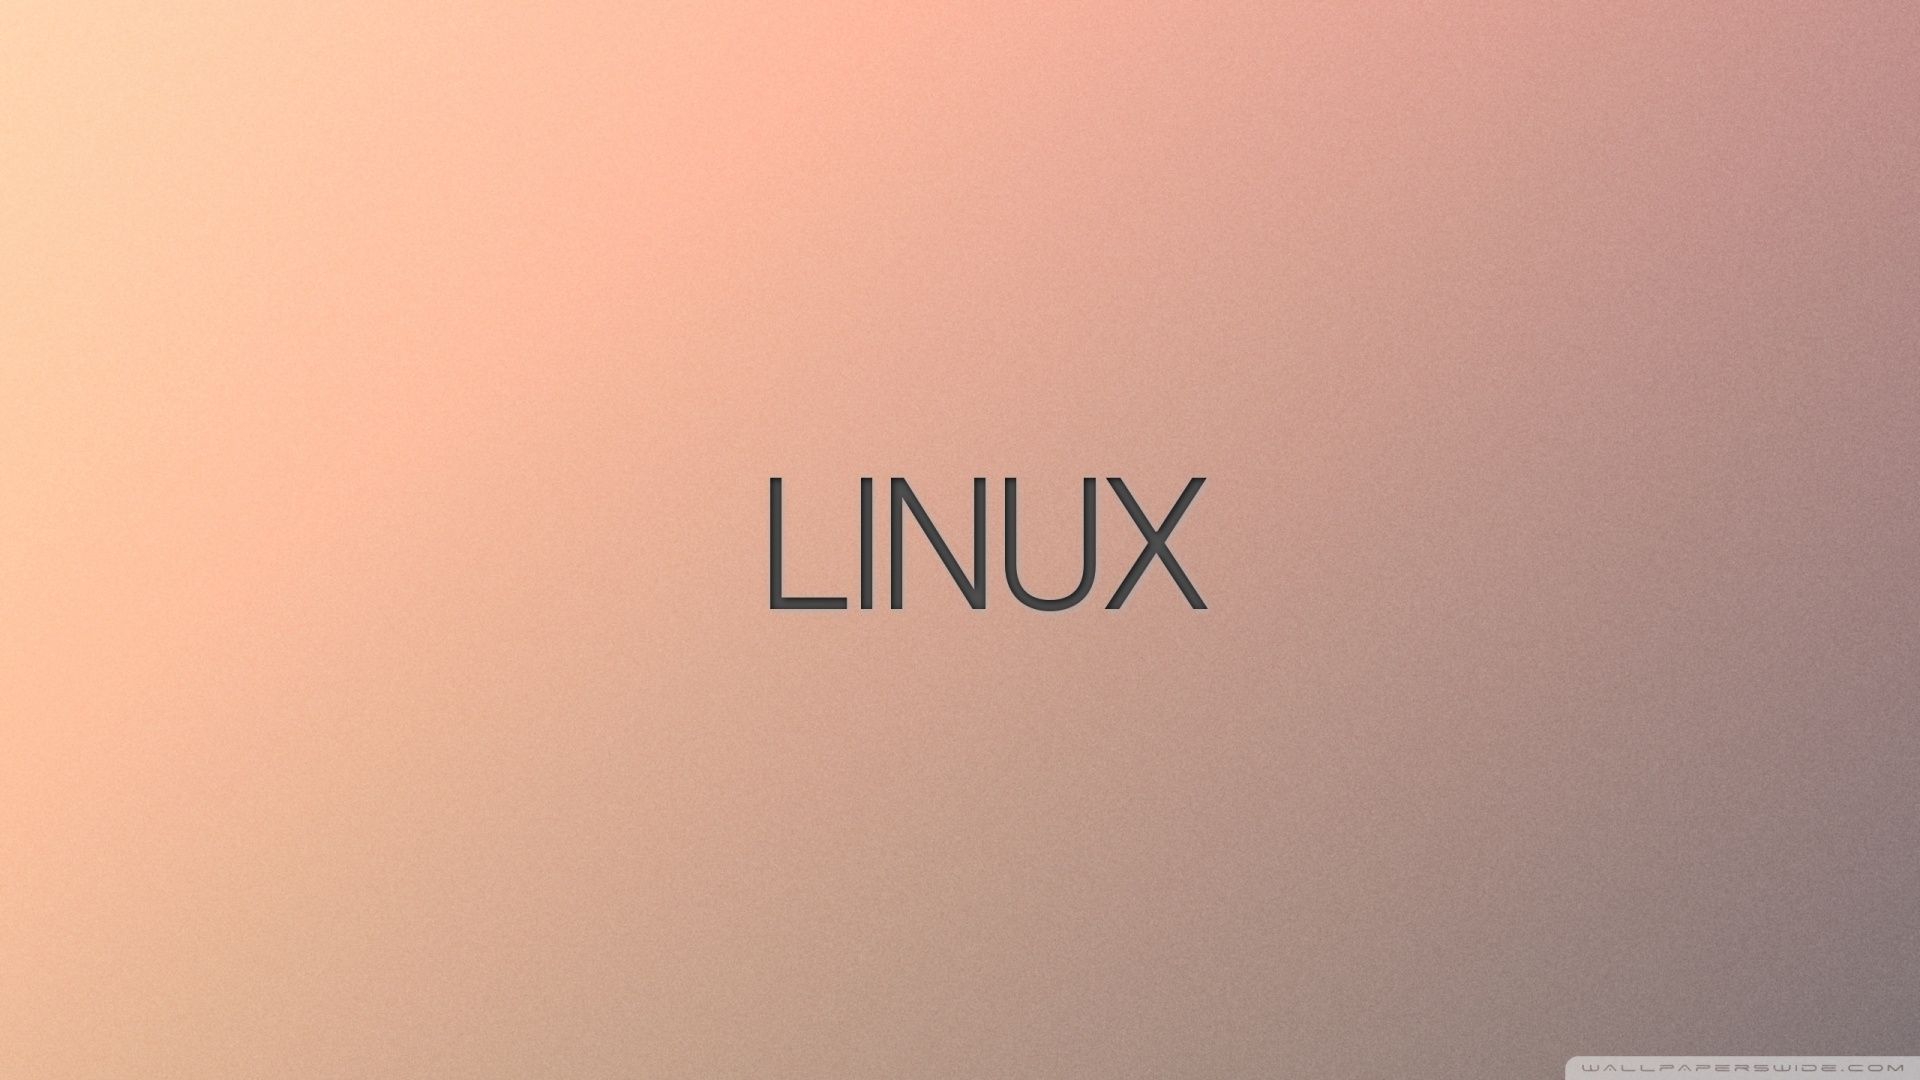 Linux Simple Background Wallpaper 1920x1080 Linux Simple Background 1920x1080